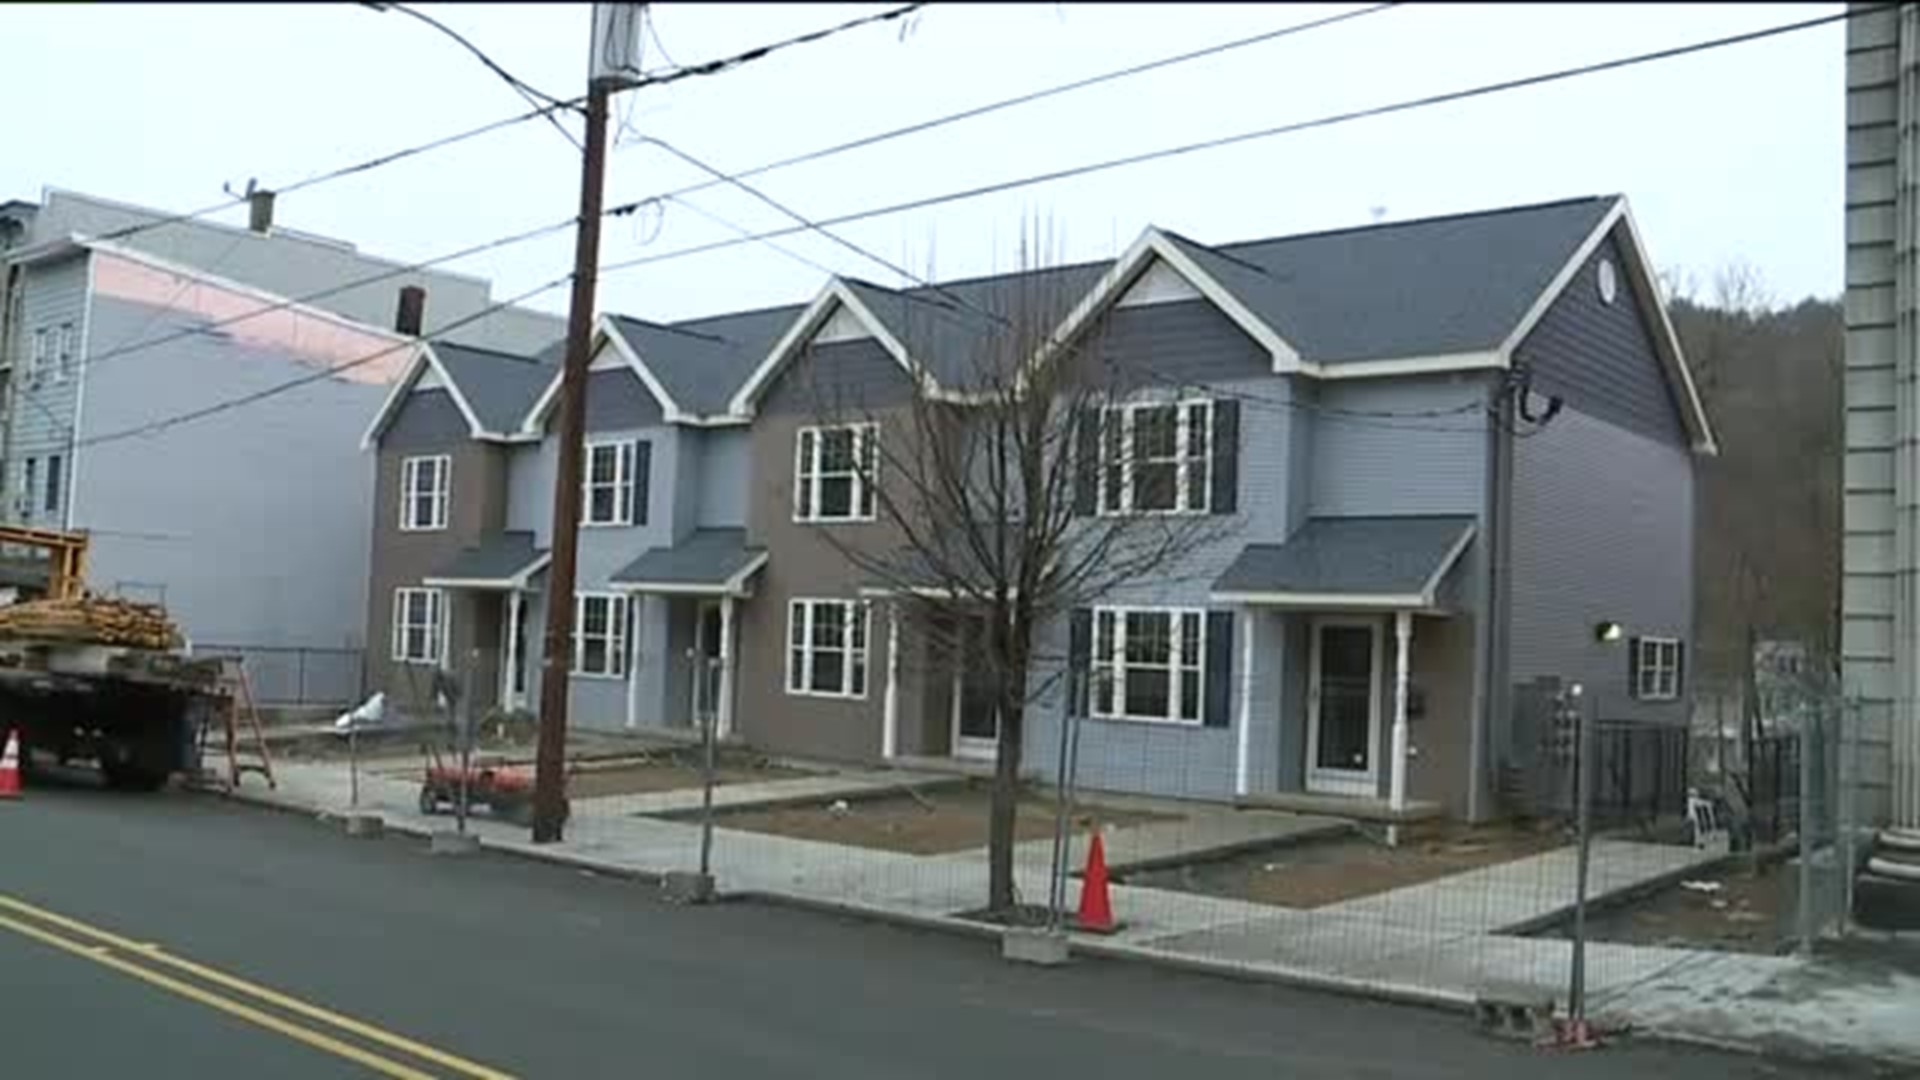 New Homes Replace Ones Destroyed by Fire in Girardville